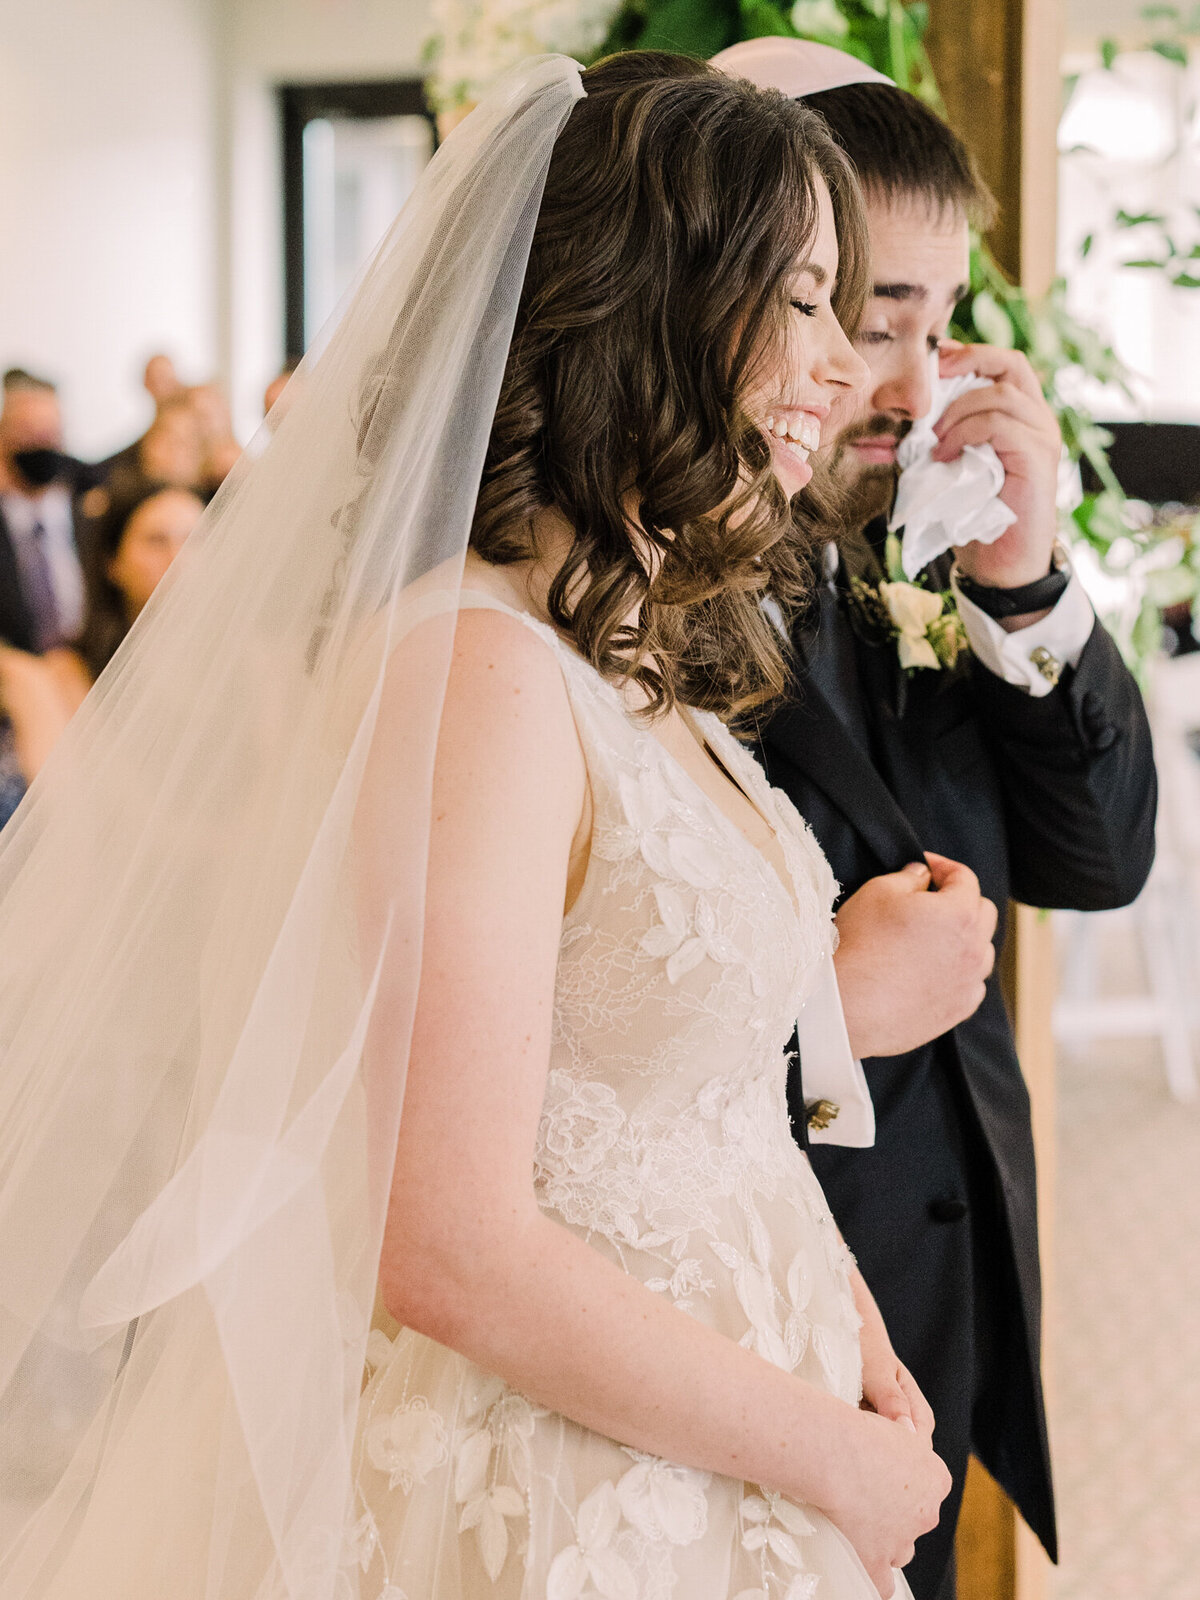 A groom sheds a tear during his Jewish wedding ceremony in Chicago